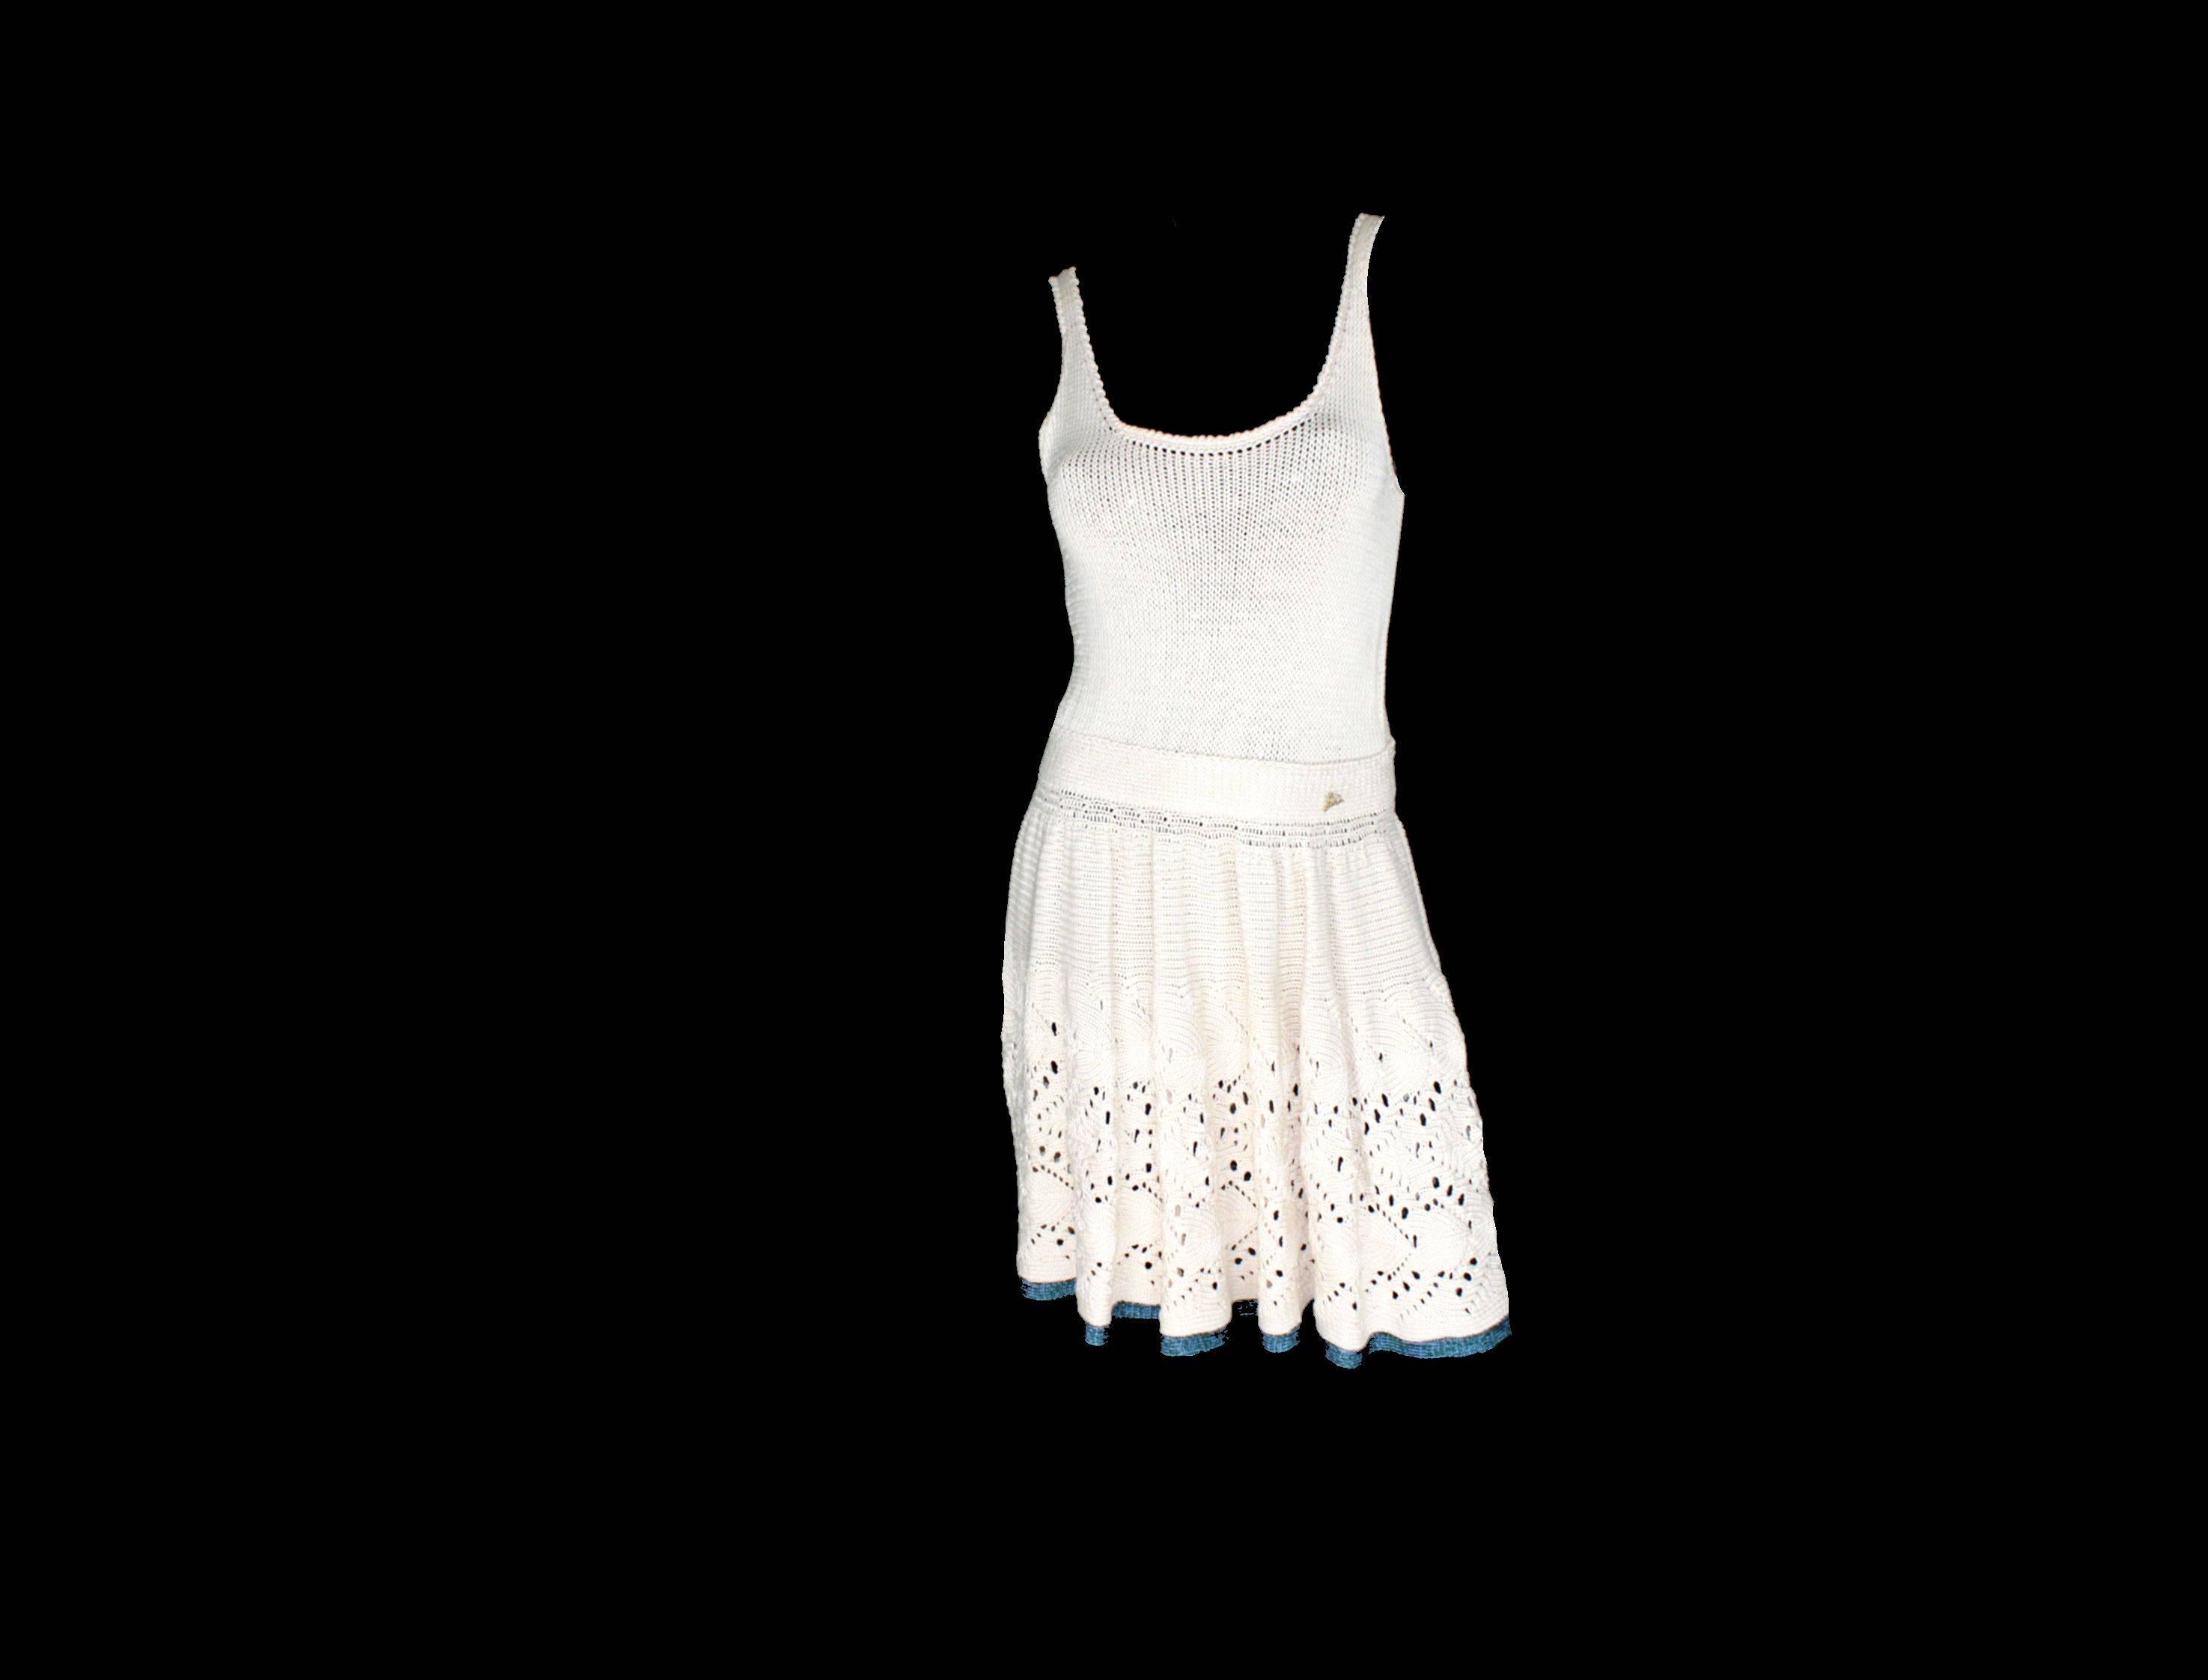 A stunning crochet knit dress by Chanel
Designed by Karl Lagerfeld
A timeless classic 
Featured in many editorials, seen on the runway and the AD campaign
Off-white with seafoam-colored trimming on seam
Chanel logo plate on waist
Finest crochet